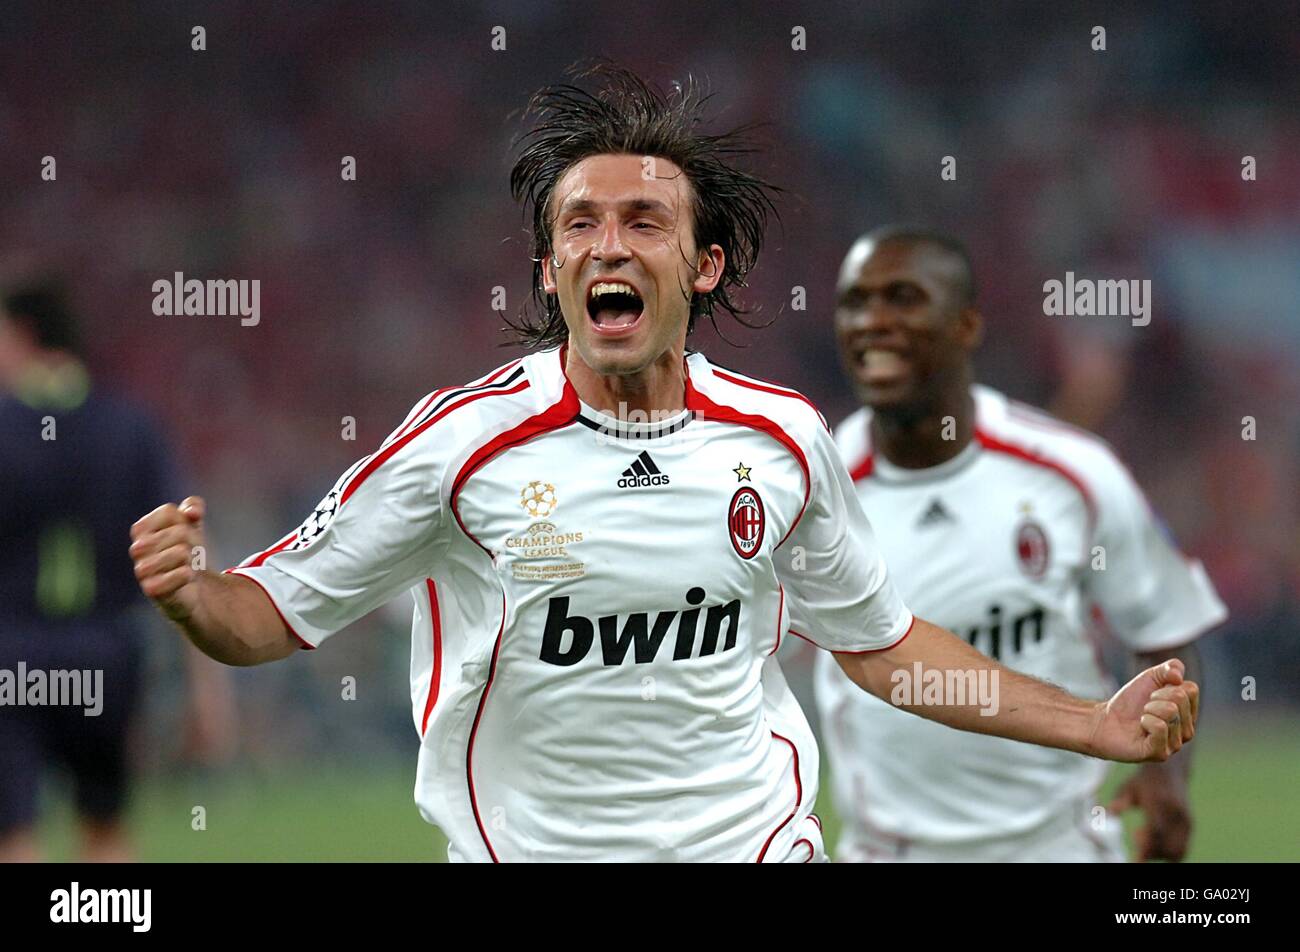 Soccer - UEFA Champions League - Final - AC Milan v Liverpool - Olympic Stadium. AC Milan's Andrea Pirlo celebrates the first goal of the match scored by Filippo Inzaghi set up by his free kick Stock Photo